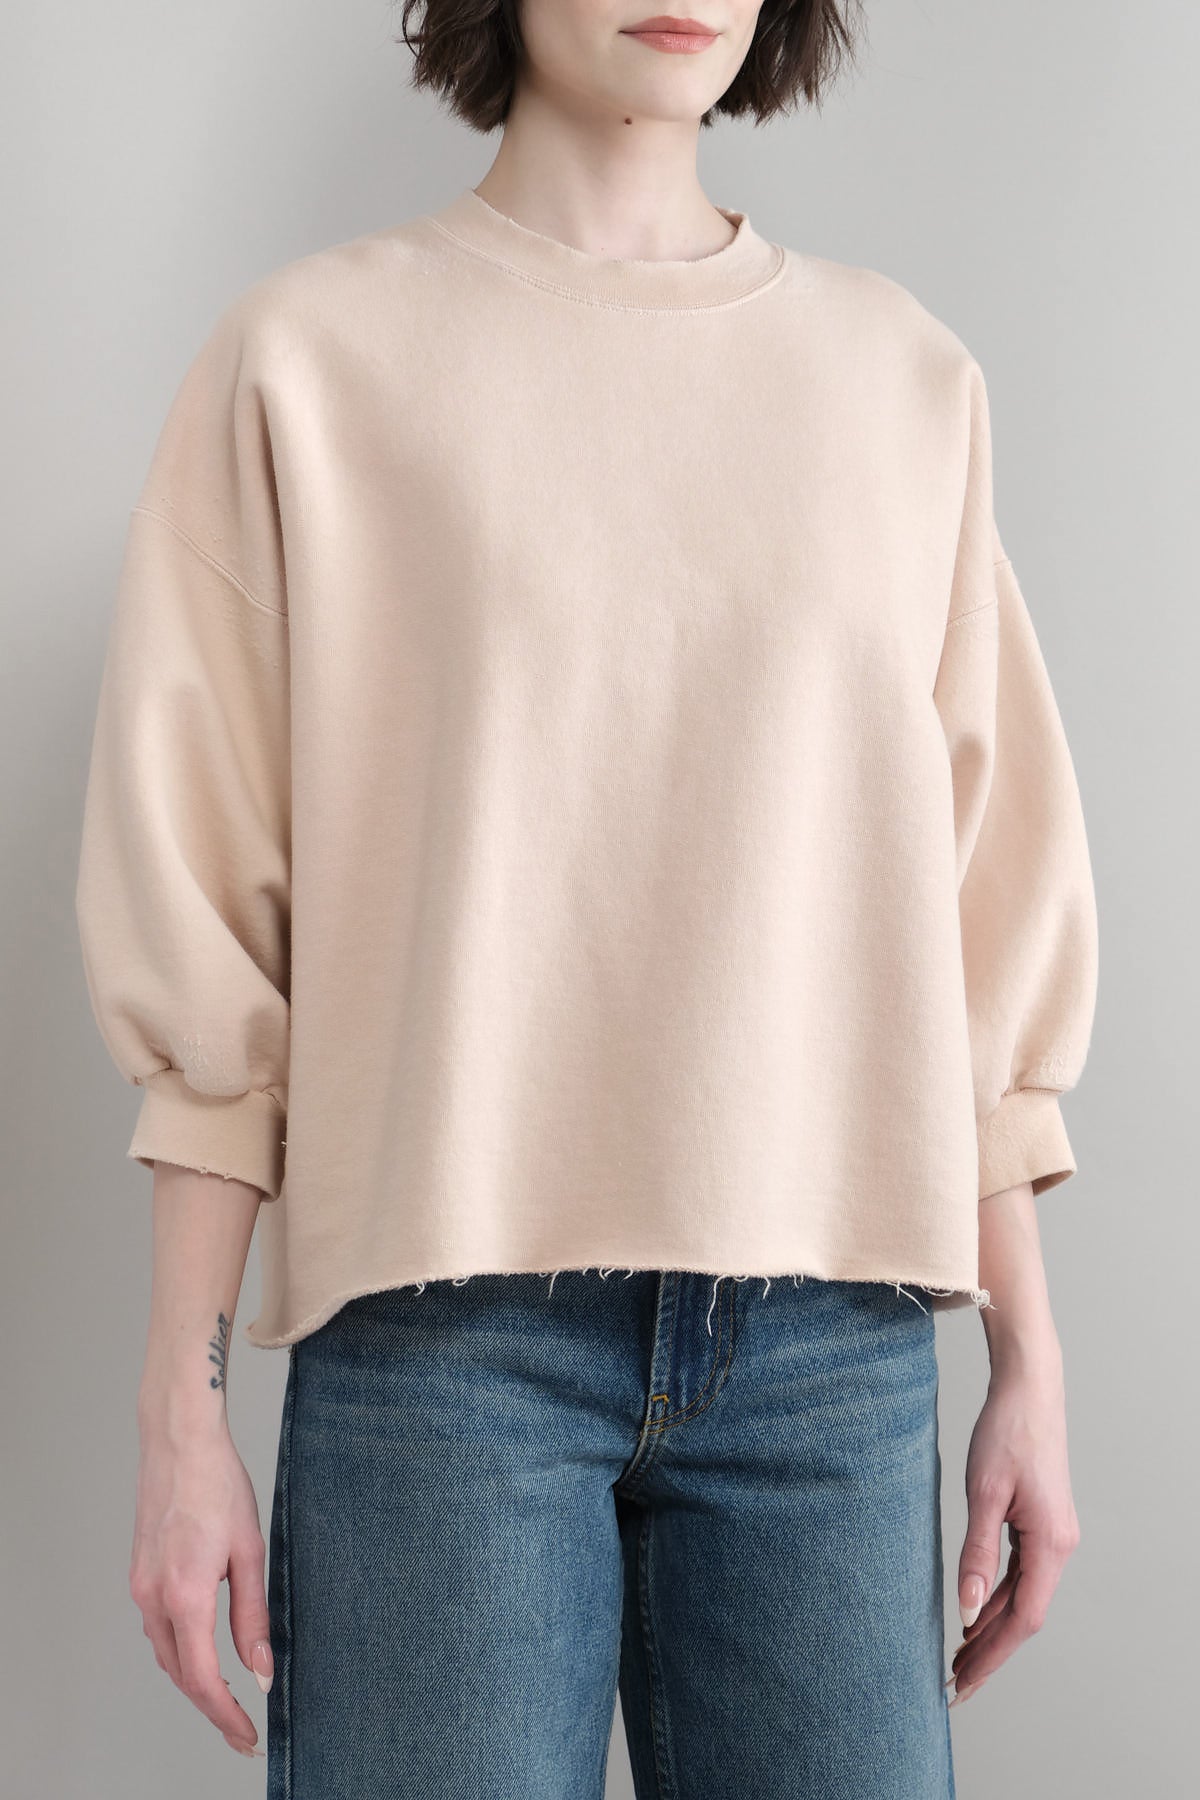 Front of Fond Sweatshirt in Oyster